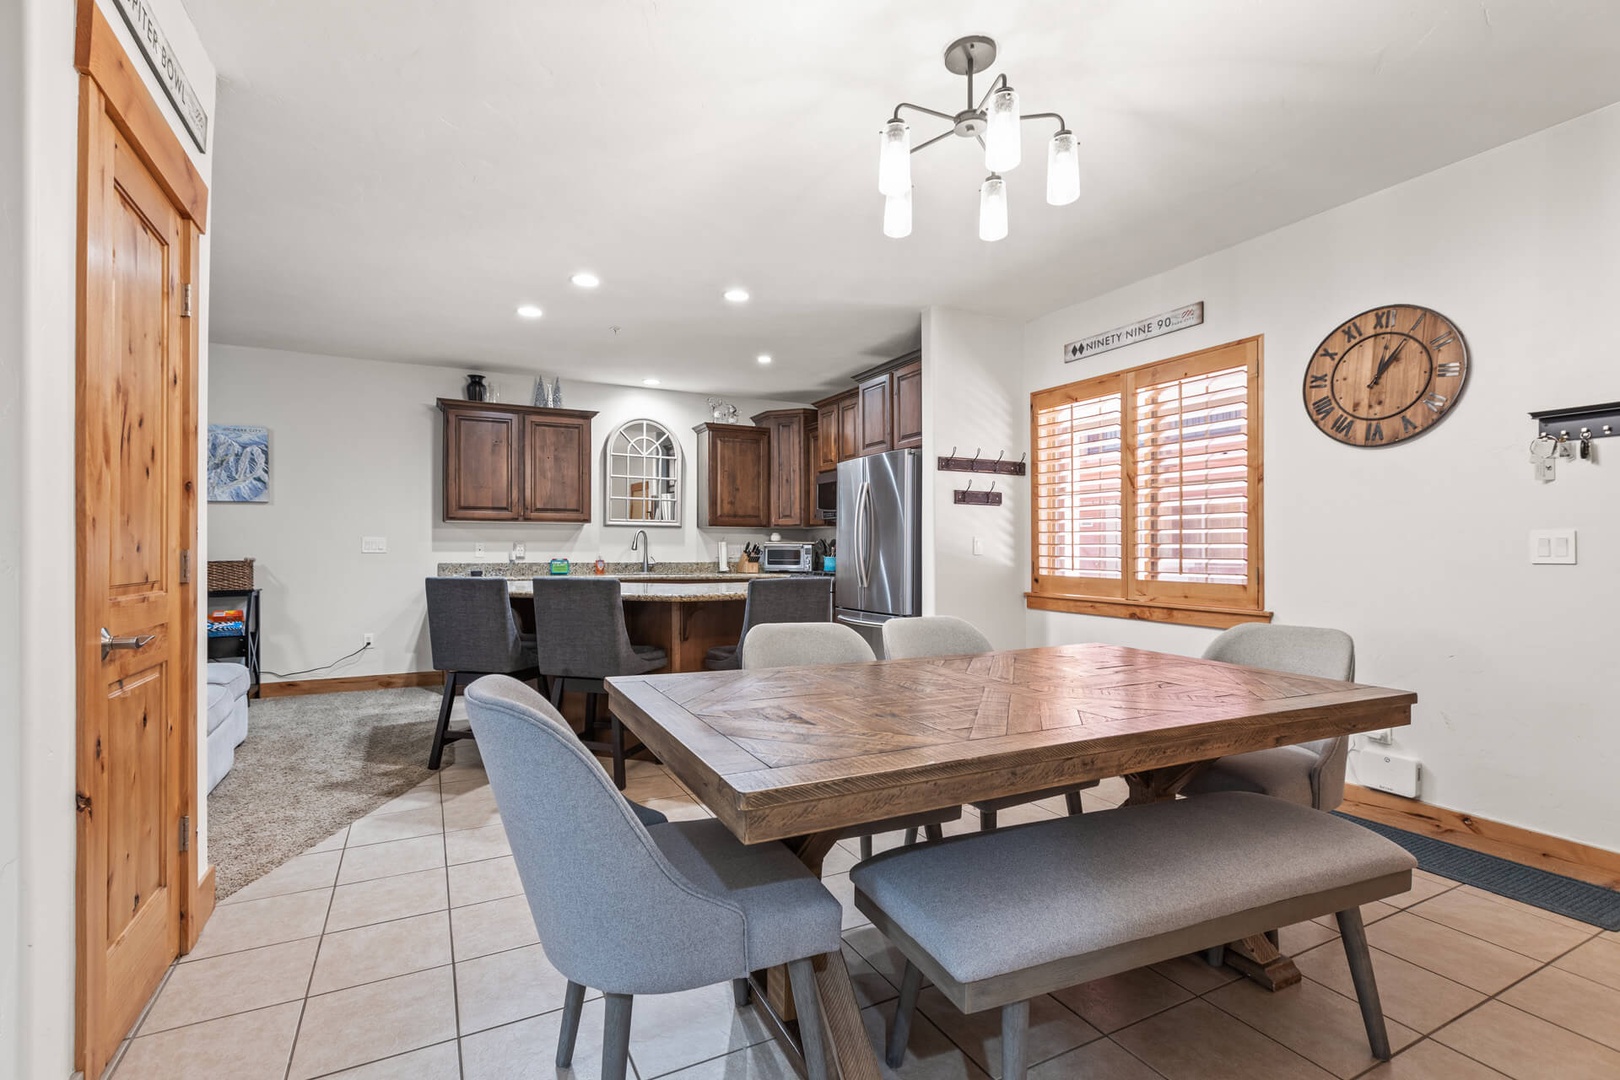 Bear Hollow Lodges 4203: There is a welcoming living space, counter top seating and an extra table for gathering and entertaining.